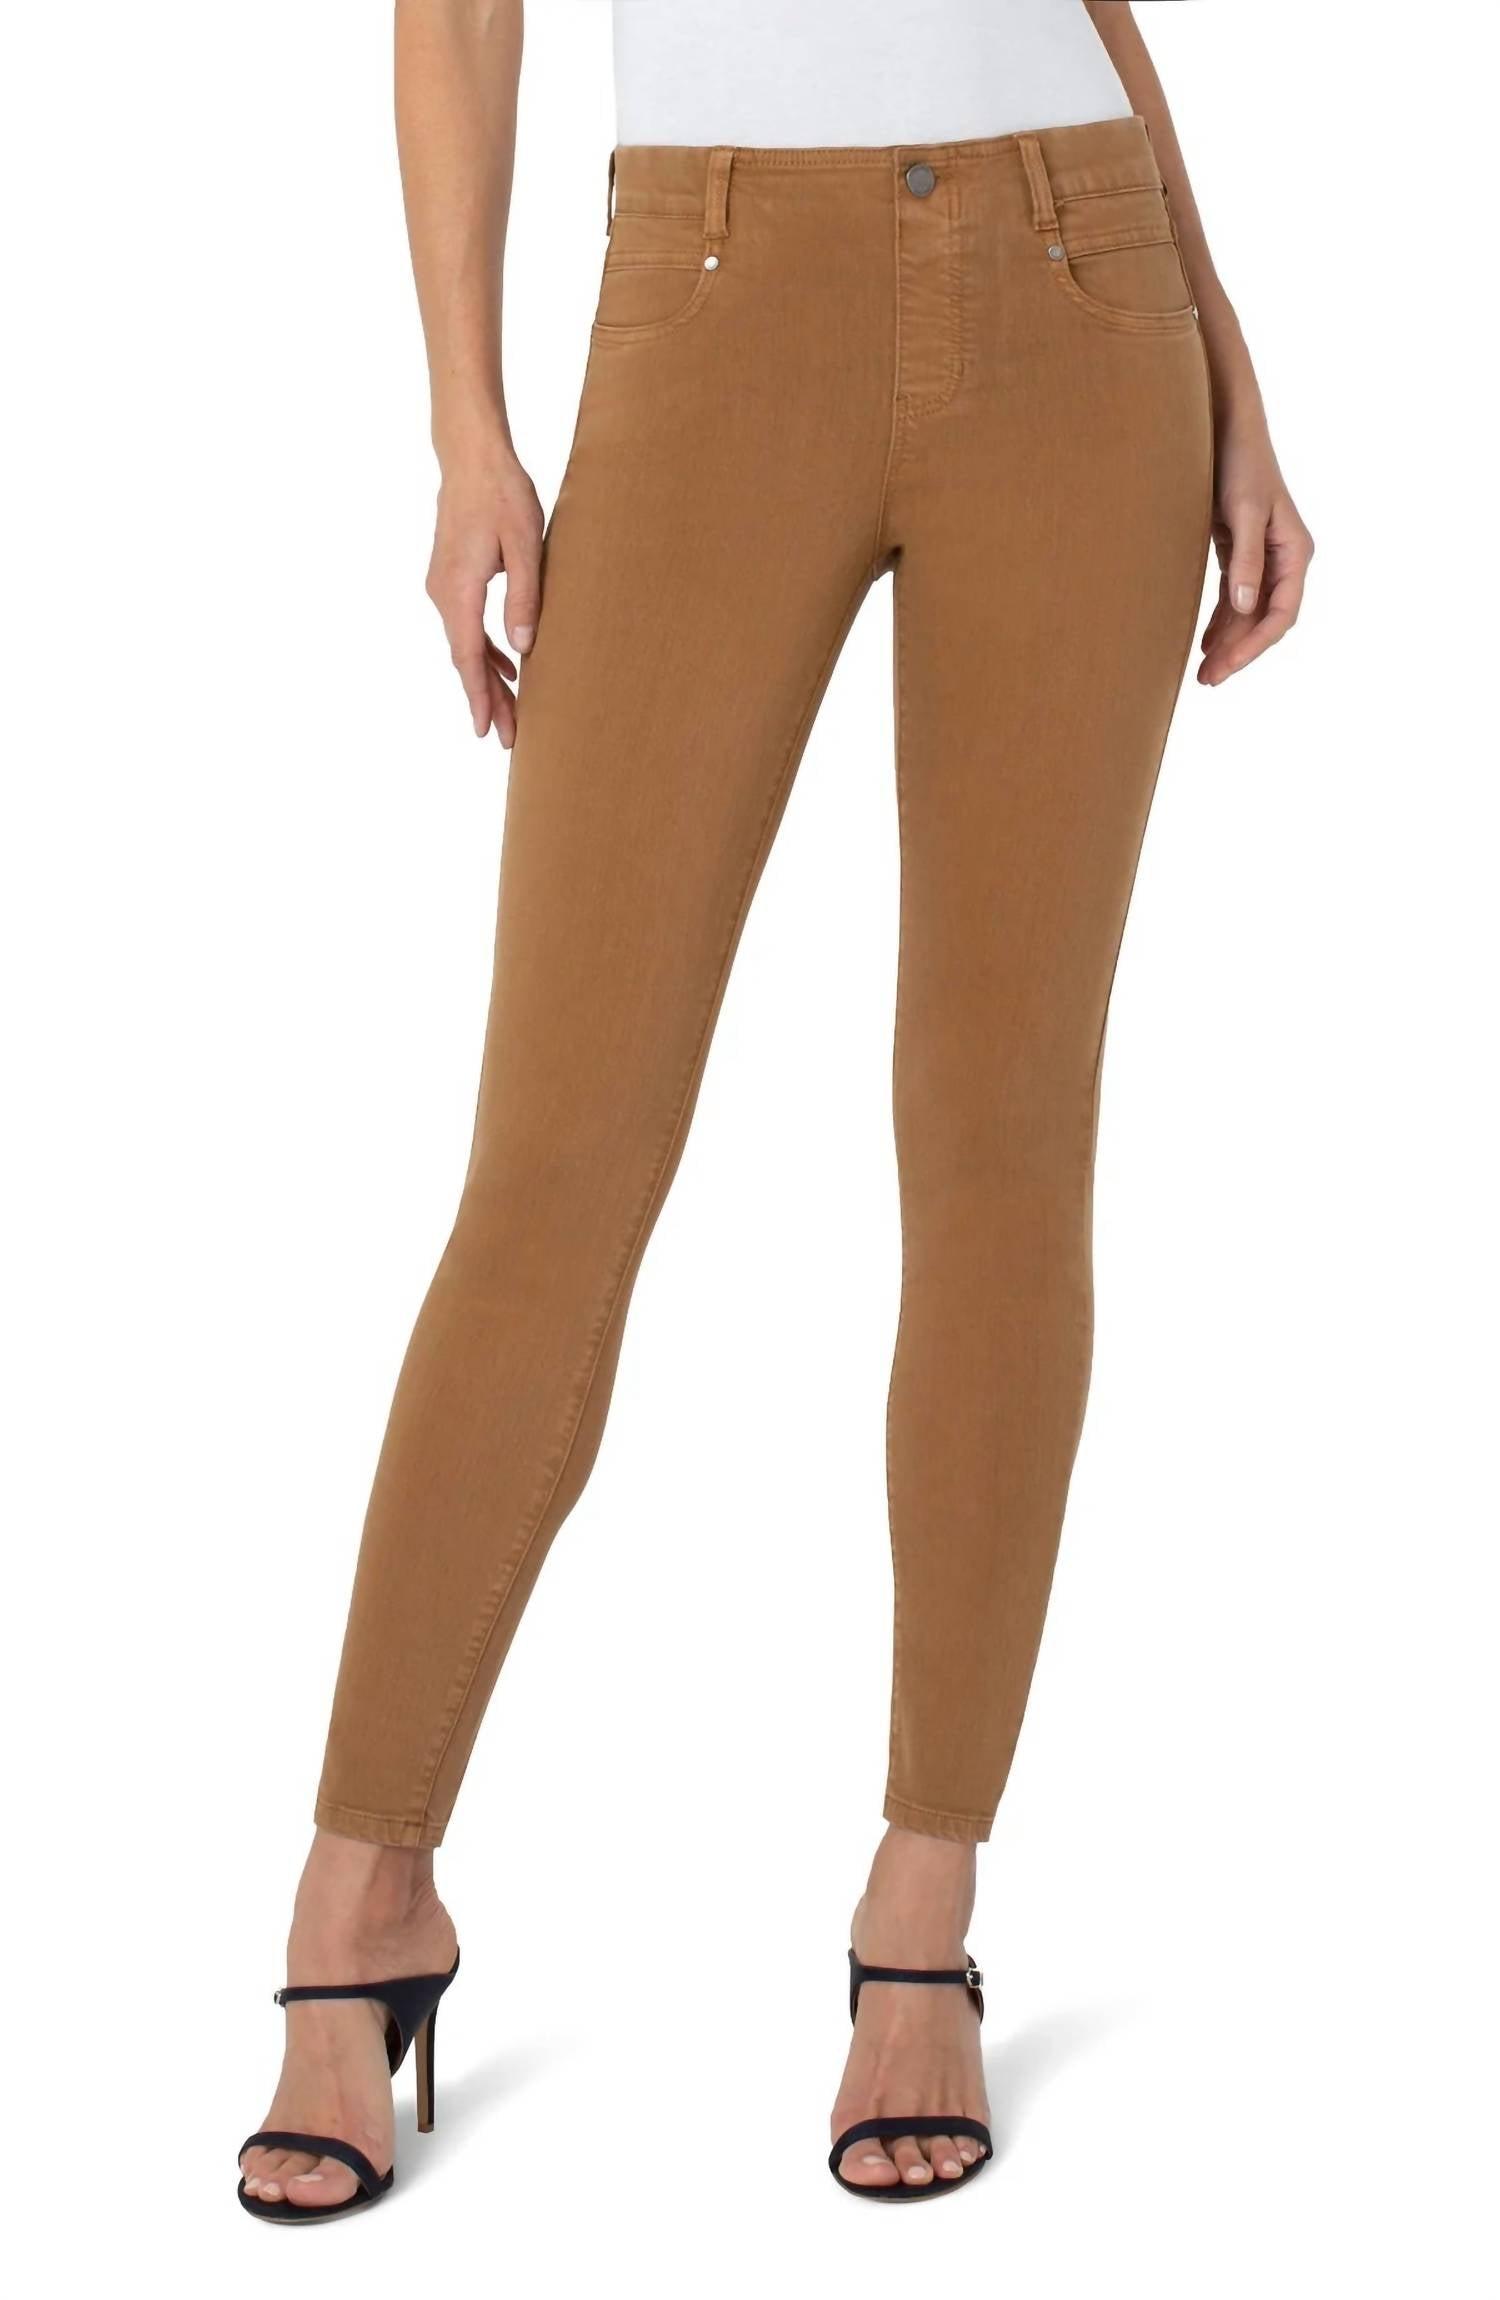 THE GIA GLIDER® PULL-ON SUPER STRETCH PONTE – LIVERPOOL LOS ANGELES